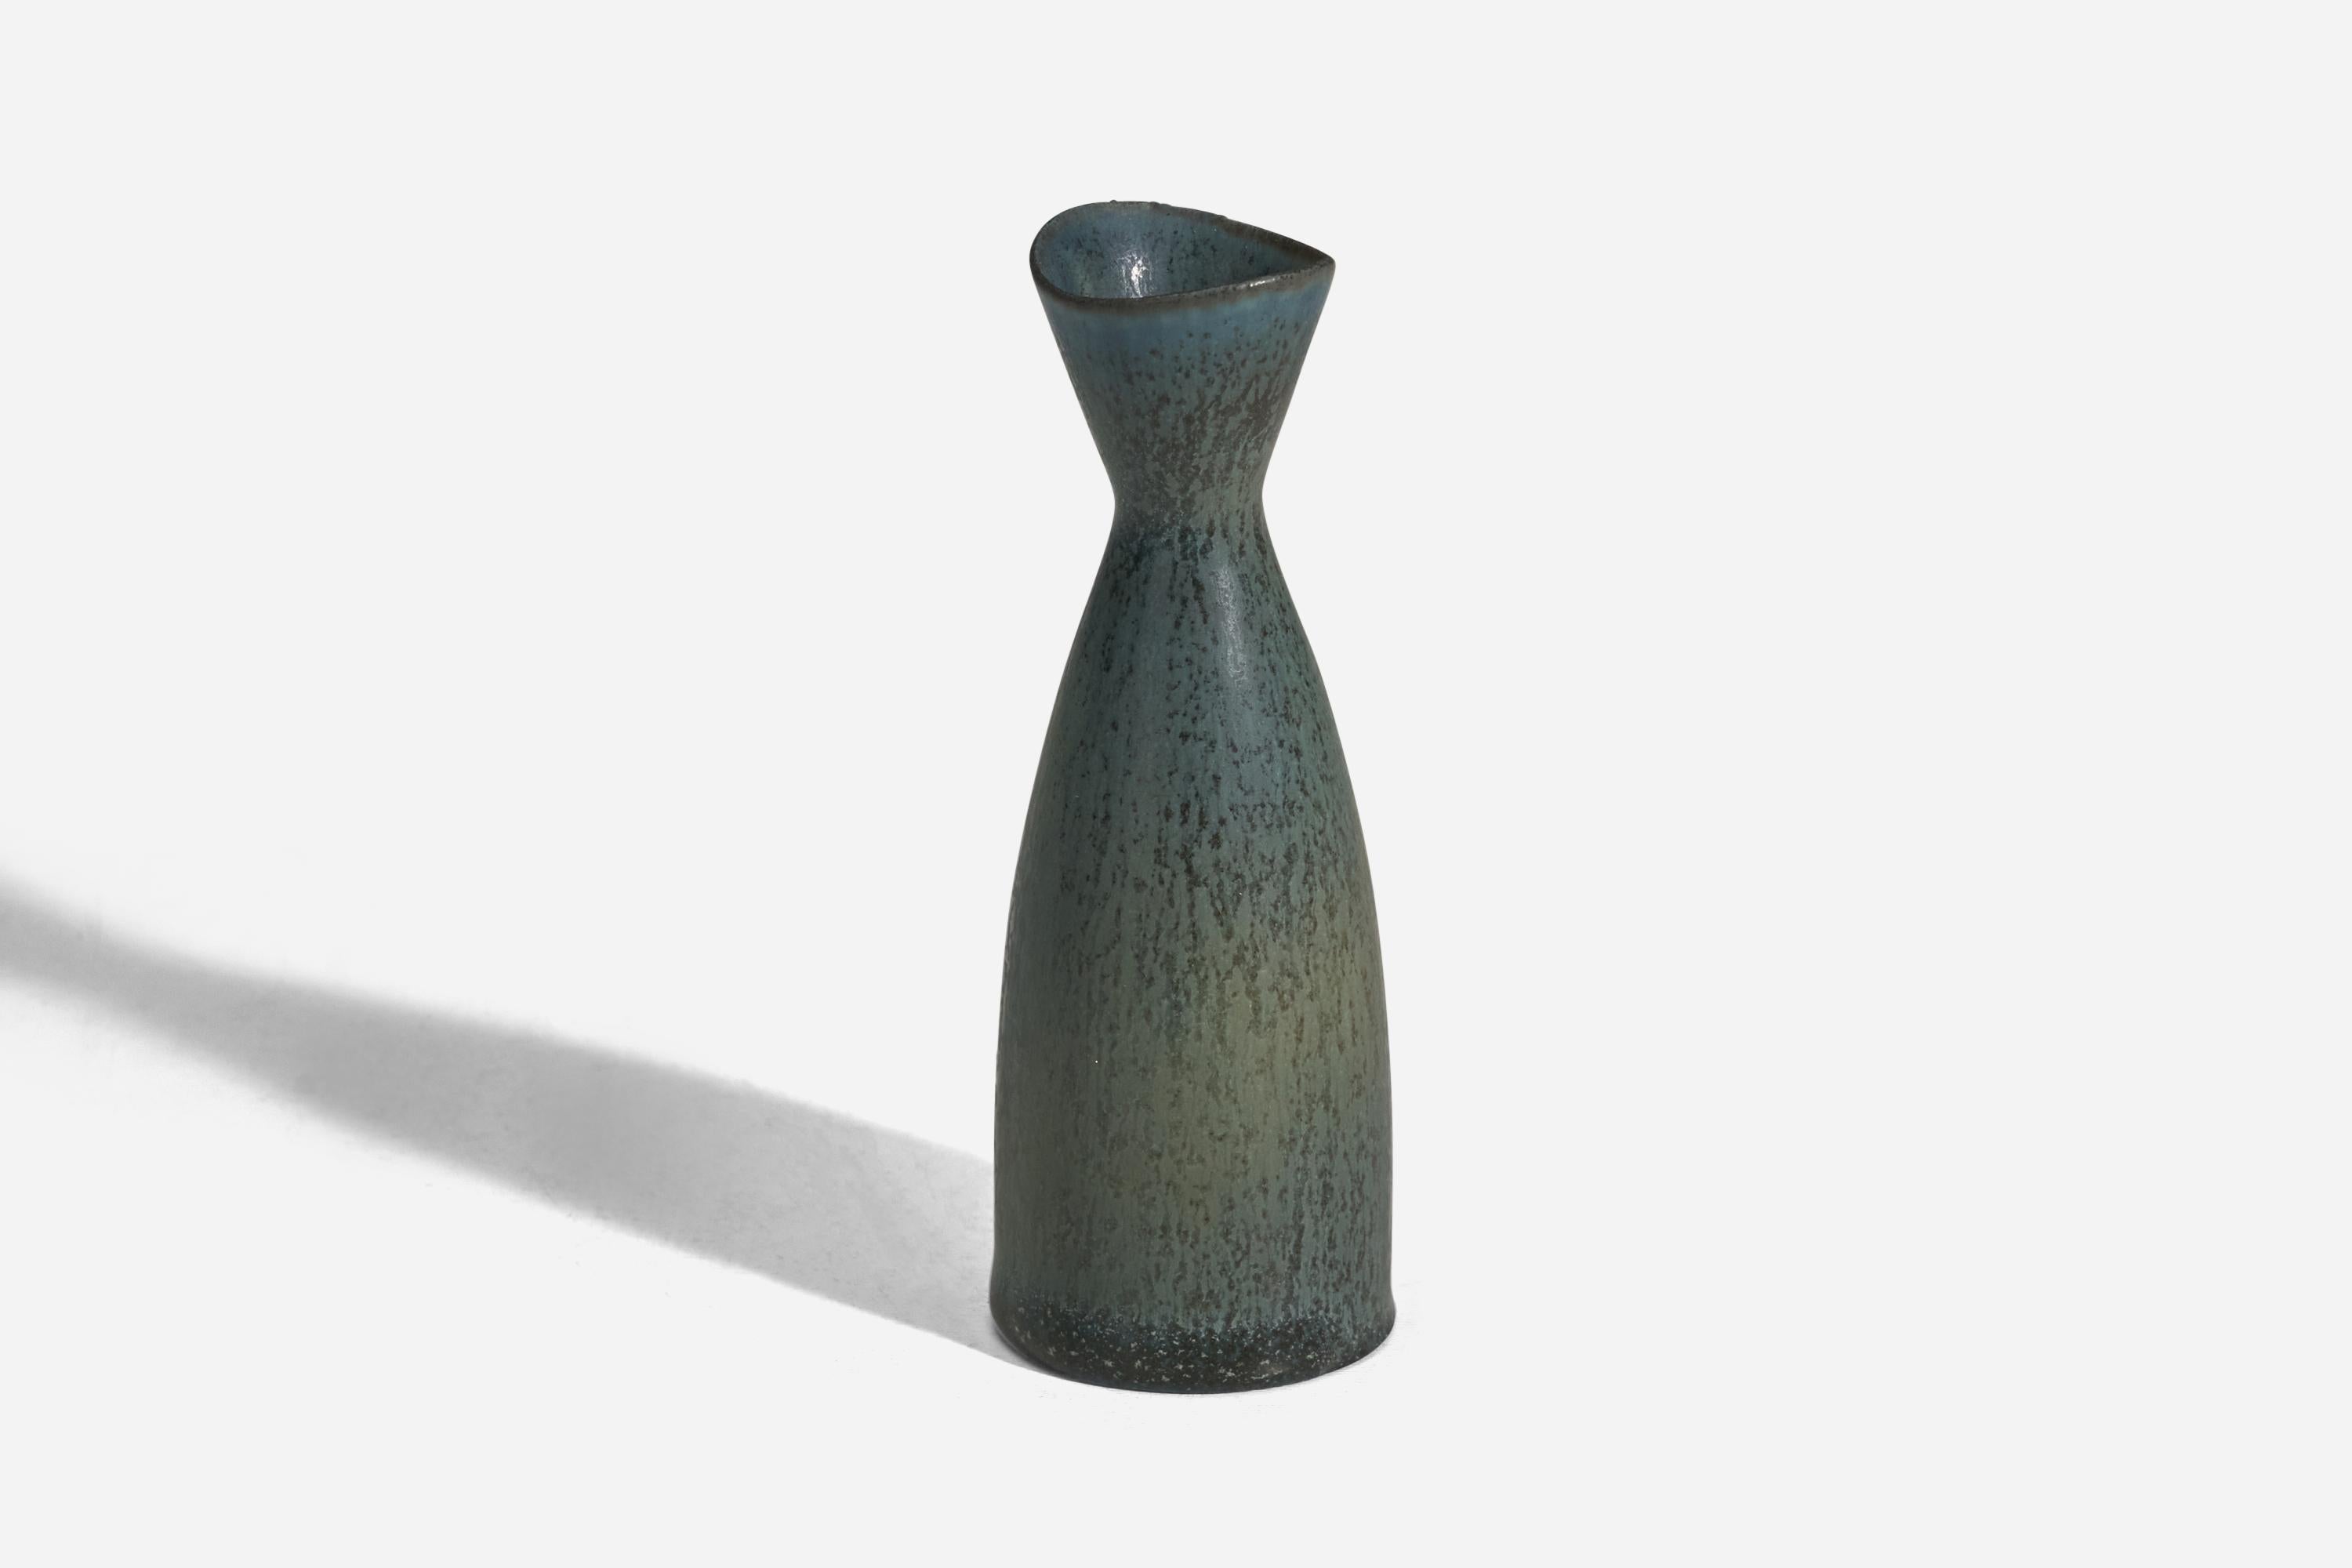 A green glazed stoneware vase designed by Carl-Harry Stålhane and produced by Rörstrand, Sweden, 1960s.